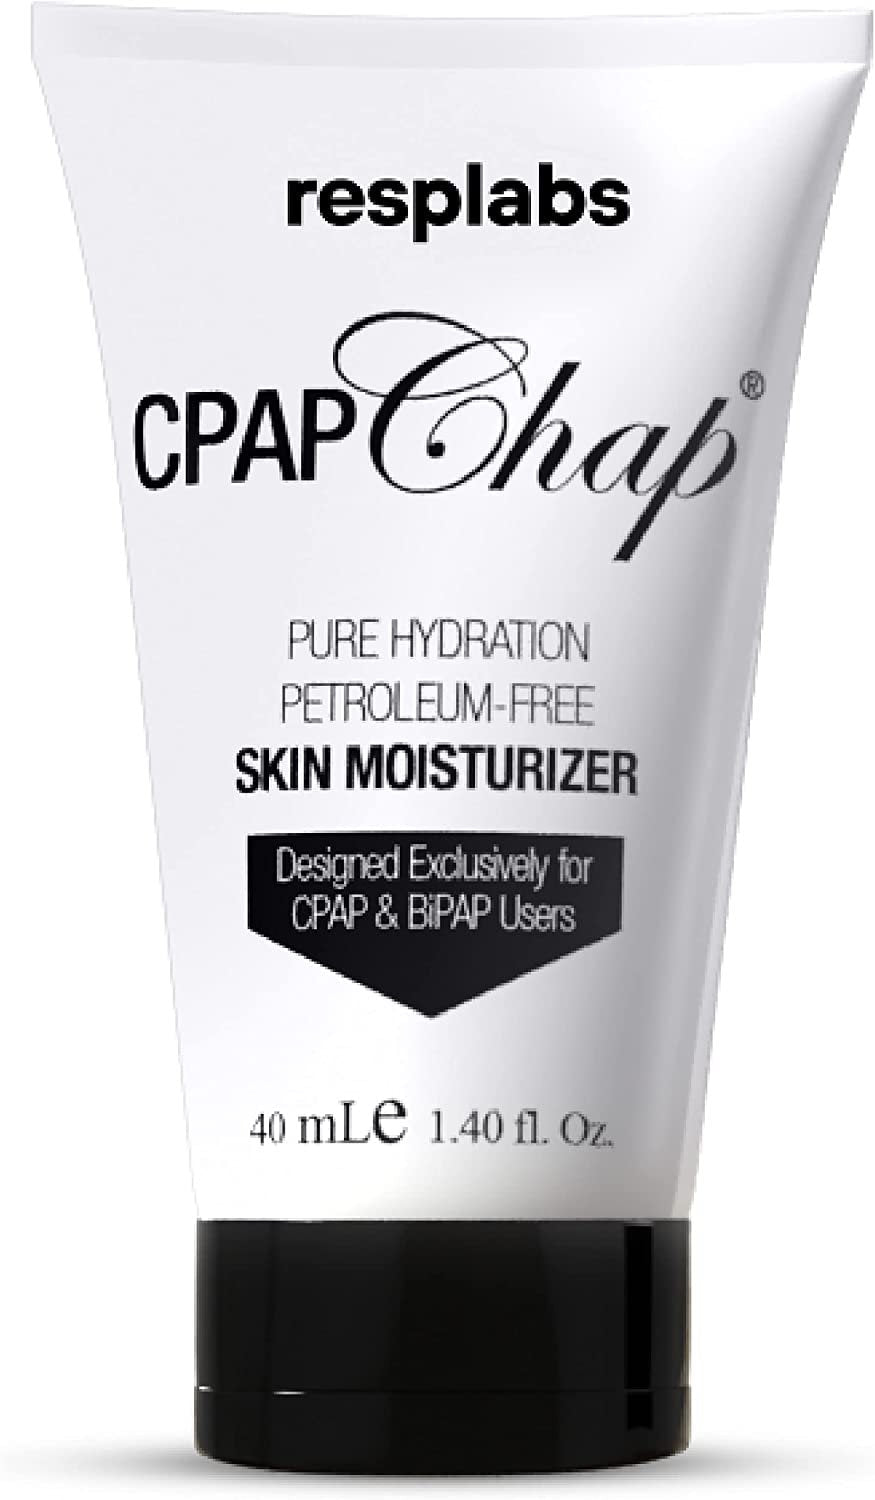 resplabs CPAP Chap - Petroleum-Free, CPAP Face Cream, Moisturizer Designed for CPAP Mask Users - 1.40 Fl Oz - Sleep Technologies